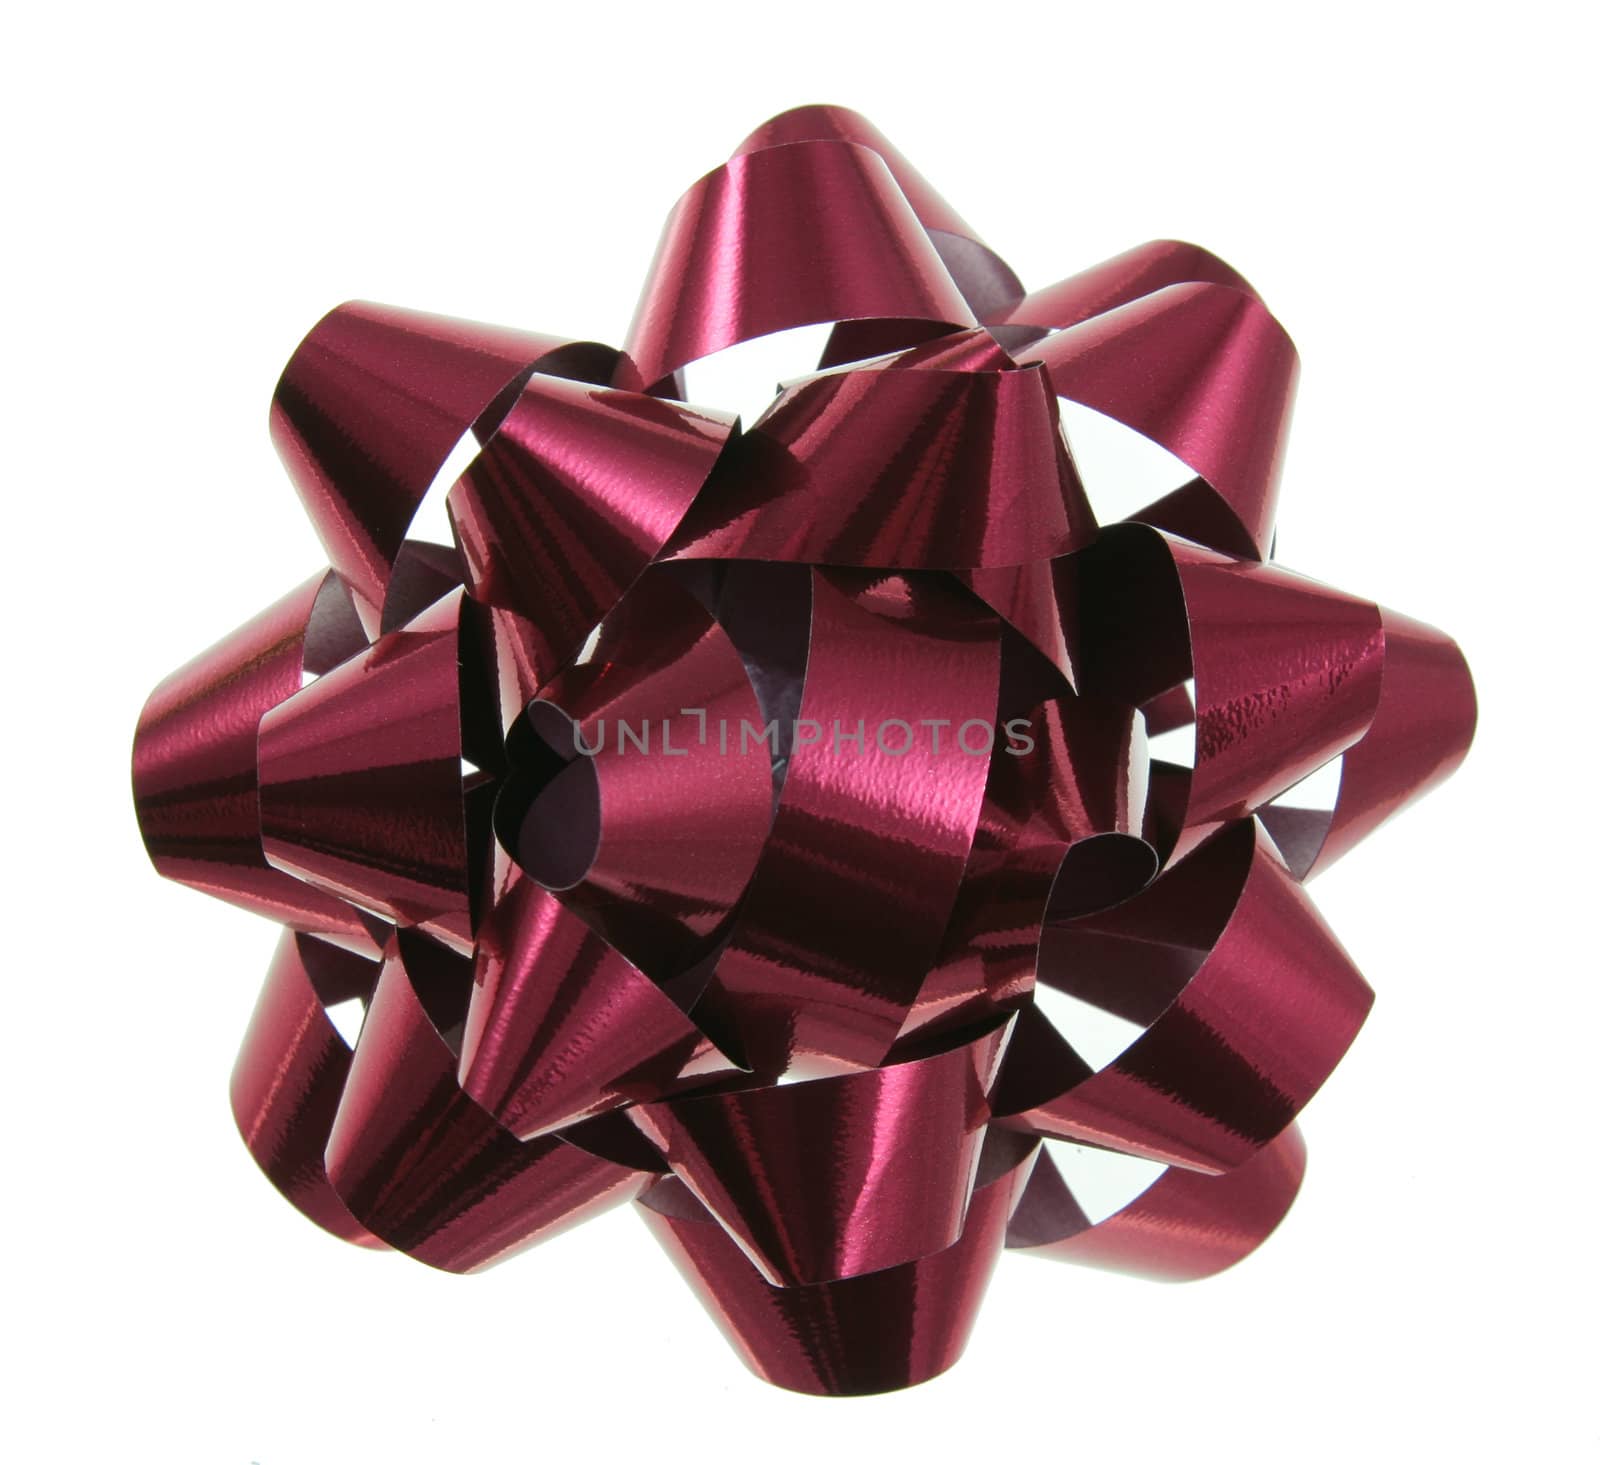 An isolated red Christmas gift bow.
